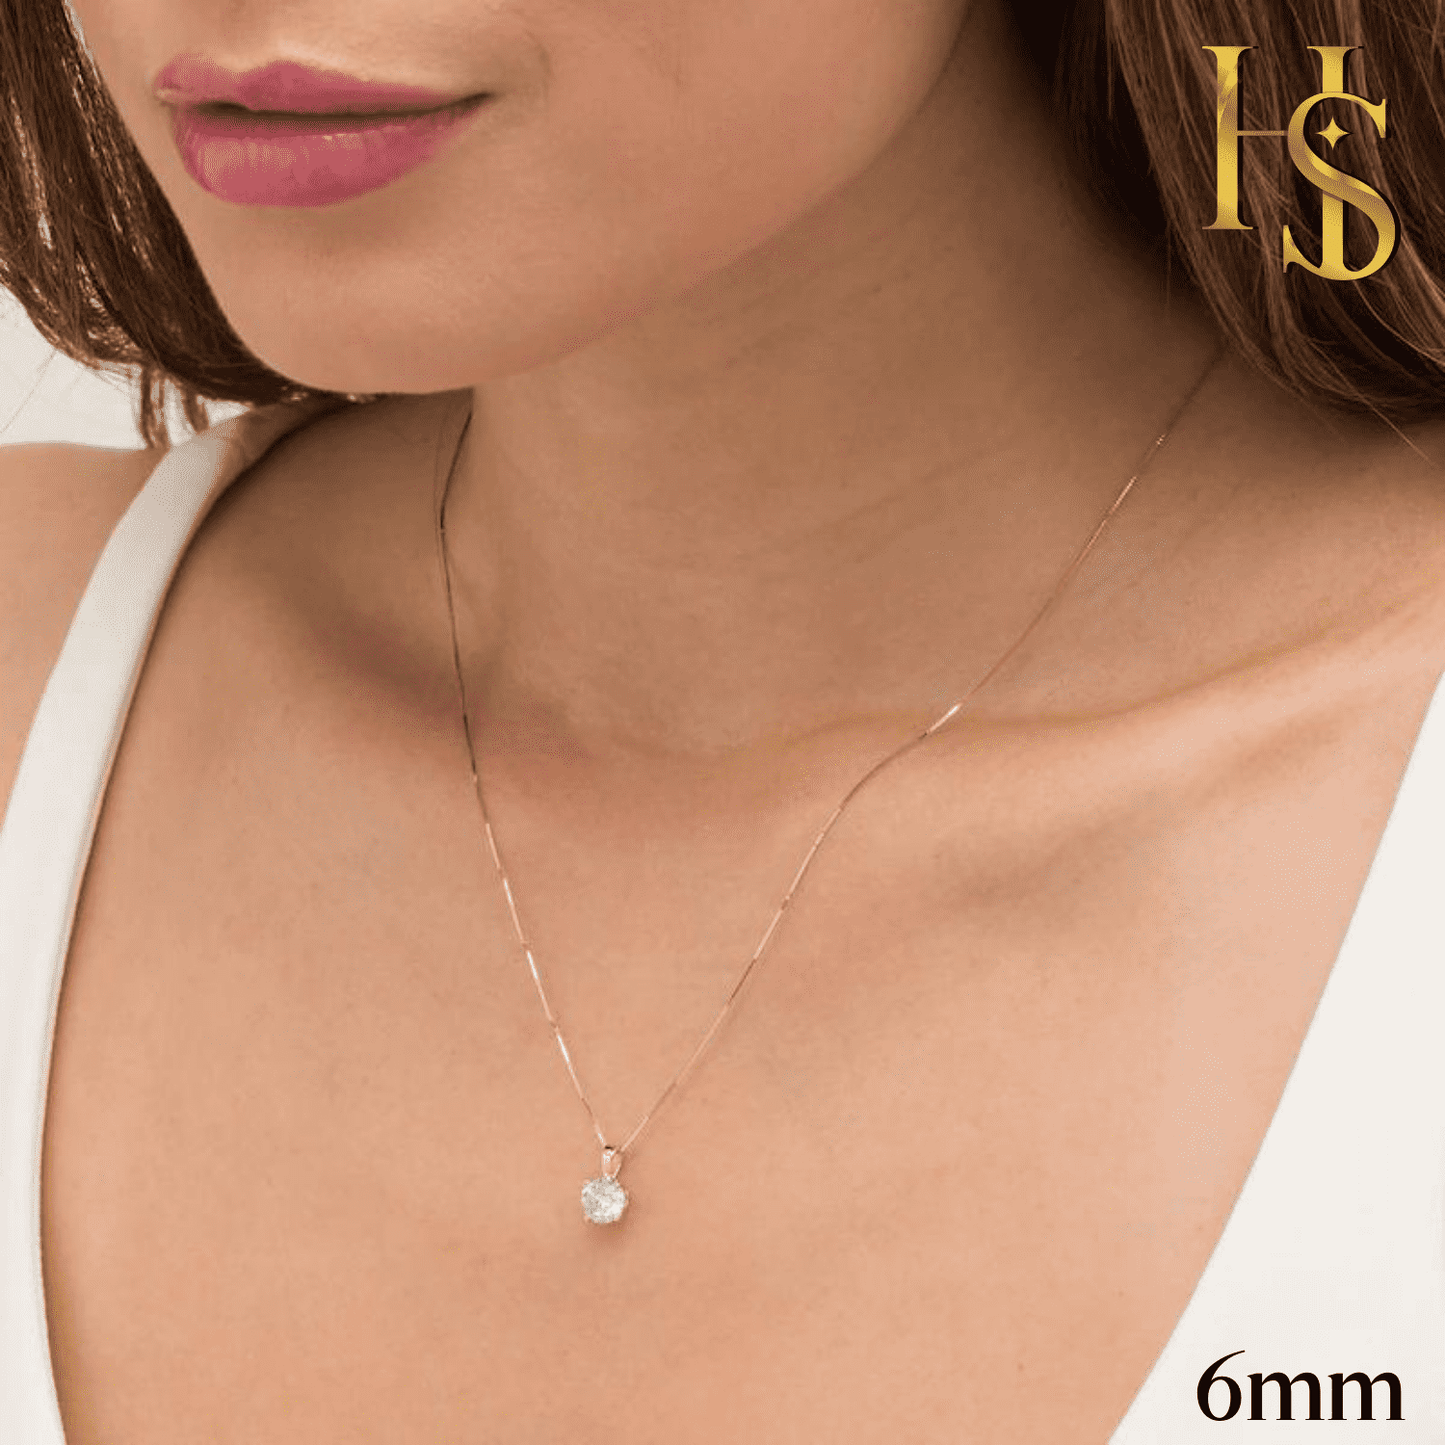 Solitaire Pendant with Chain in 92.5 Silver embellished with Swarovski Zirconia - 18K Gold finish